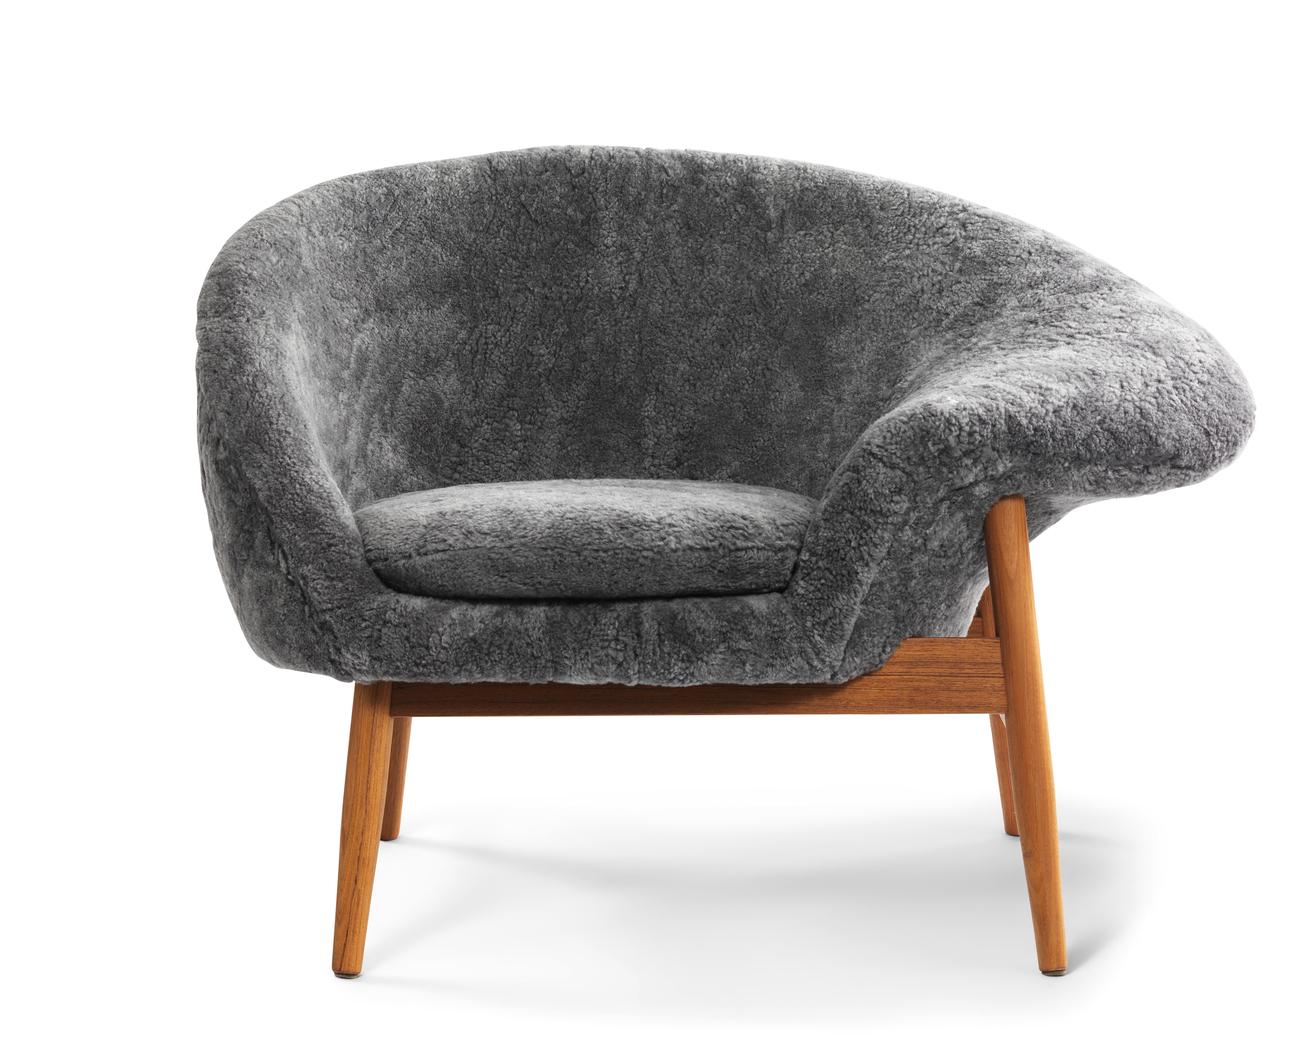 Fried egg right lounge chair sheepskin grey by Warm Nordic
Dimensions: D99 x W68 x H 68 cm
Material: Sheepskin, Textile or nubuck upholstery, Solid oiled teak
Weight: 25 kg
Also available in different colours and finishes. 

A unique